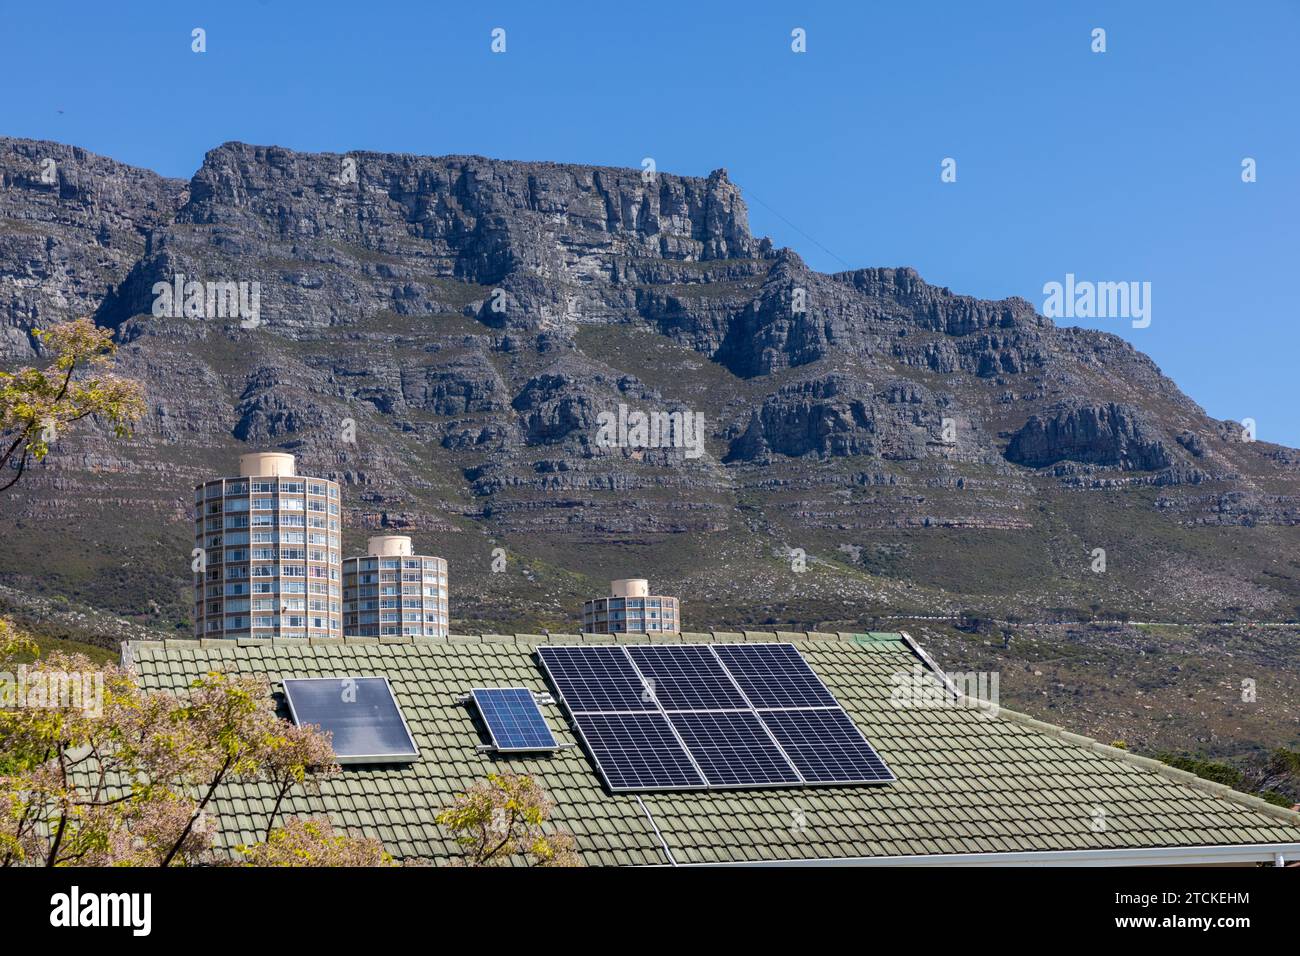 Solar panels, aimed at mitigating 'load-shedding' or blackouts, are seen on a residential roof in a suburb of Cape Town, South Africa. Stock Photo